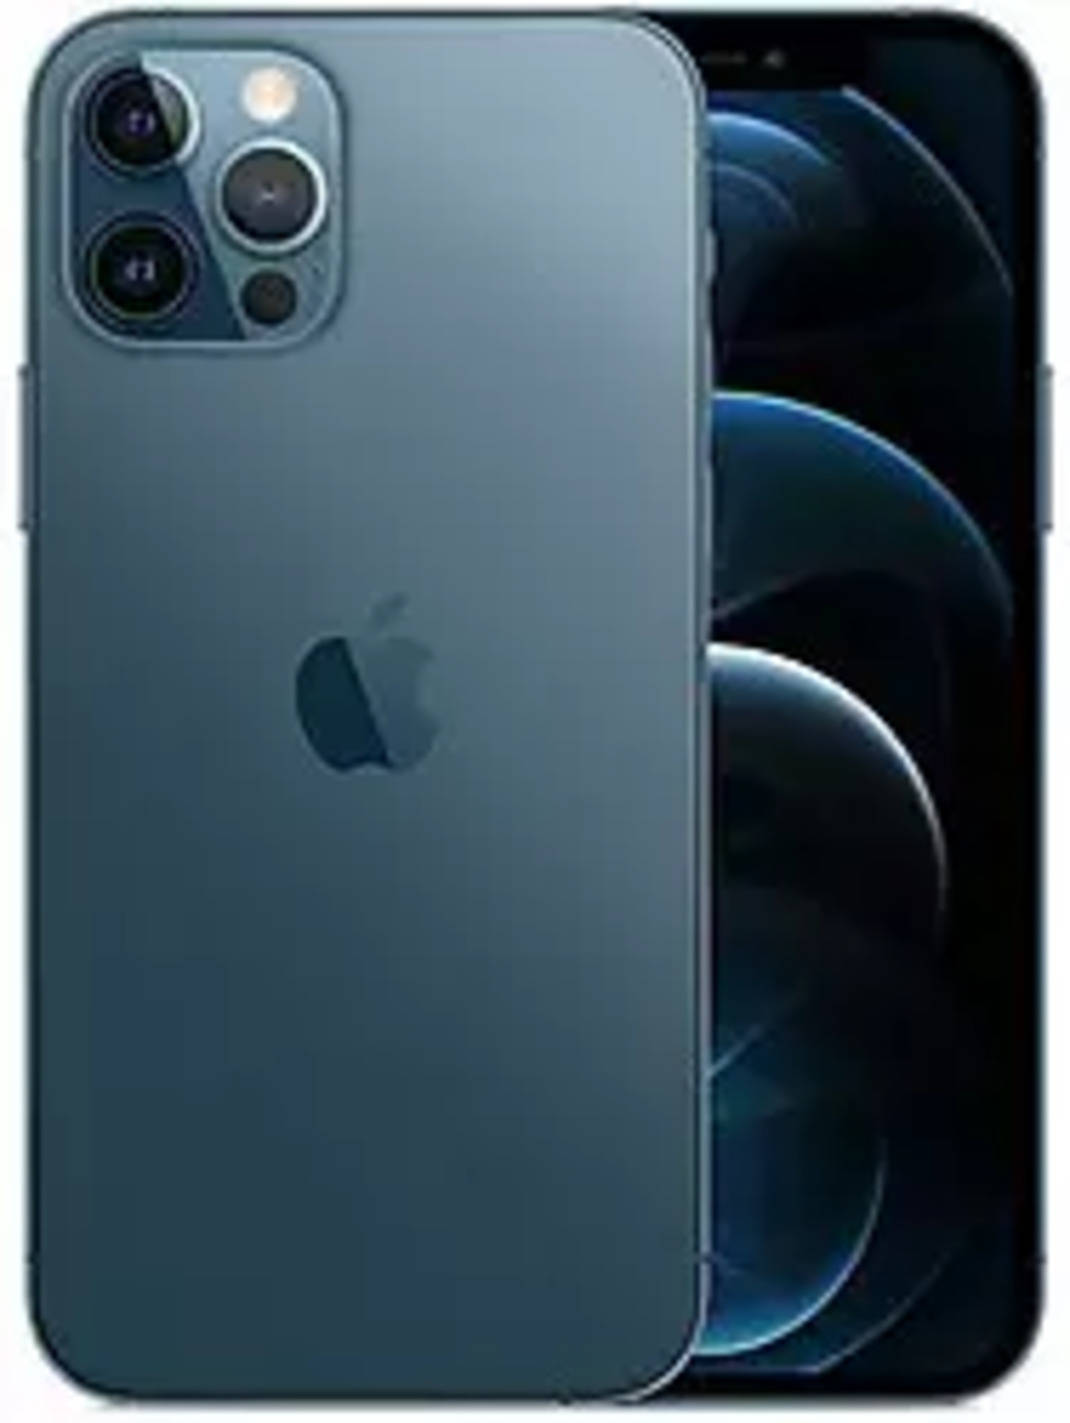 Apple Iphone 12 Pro Max Vs Apple Iphone 13 Pro Max Compare Specifications Price Gadgets Now